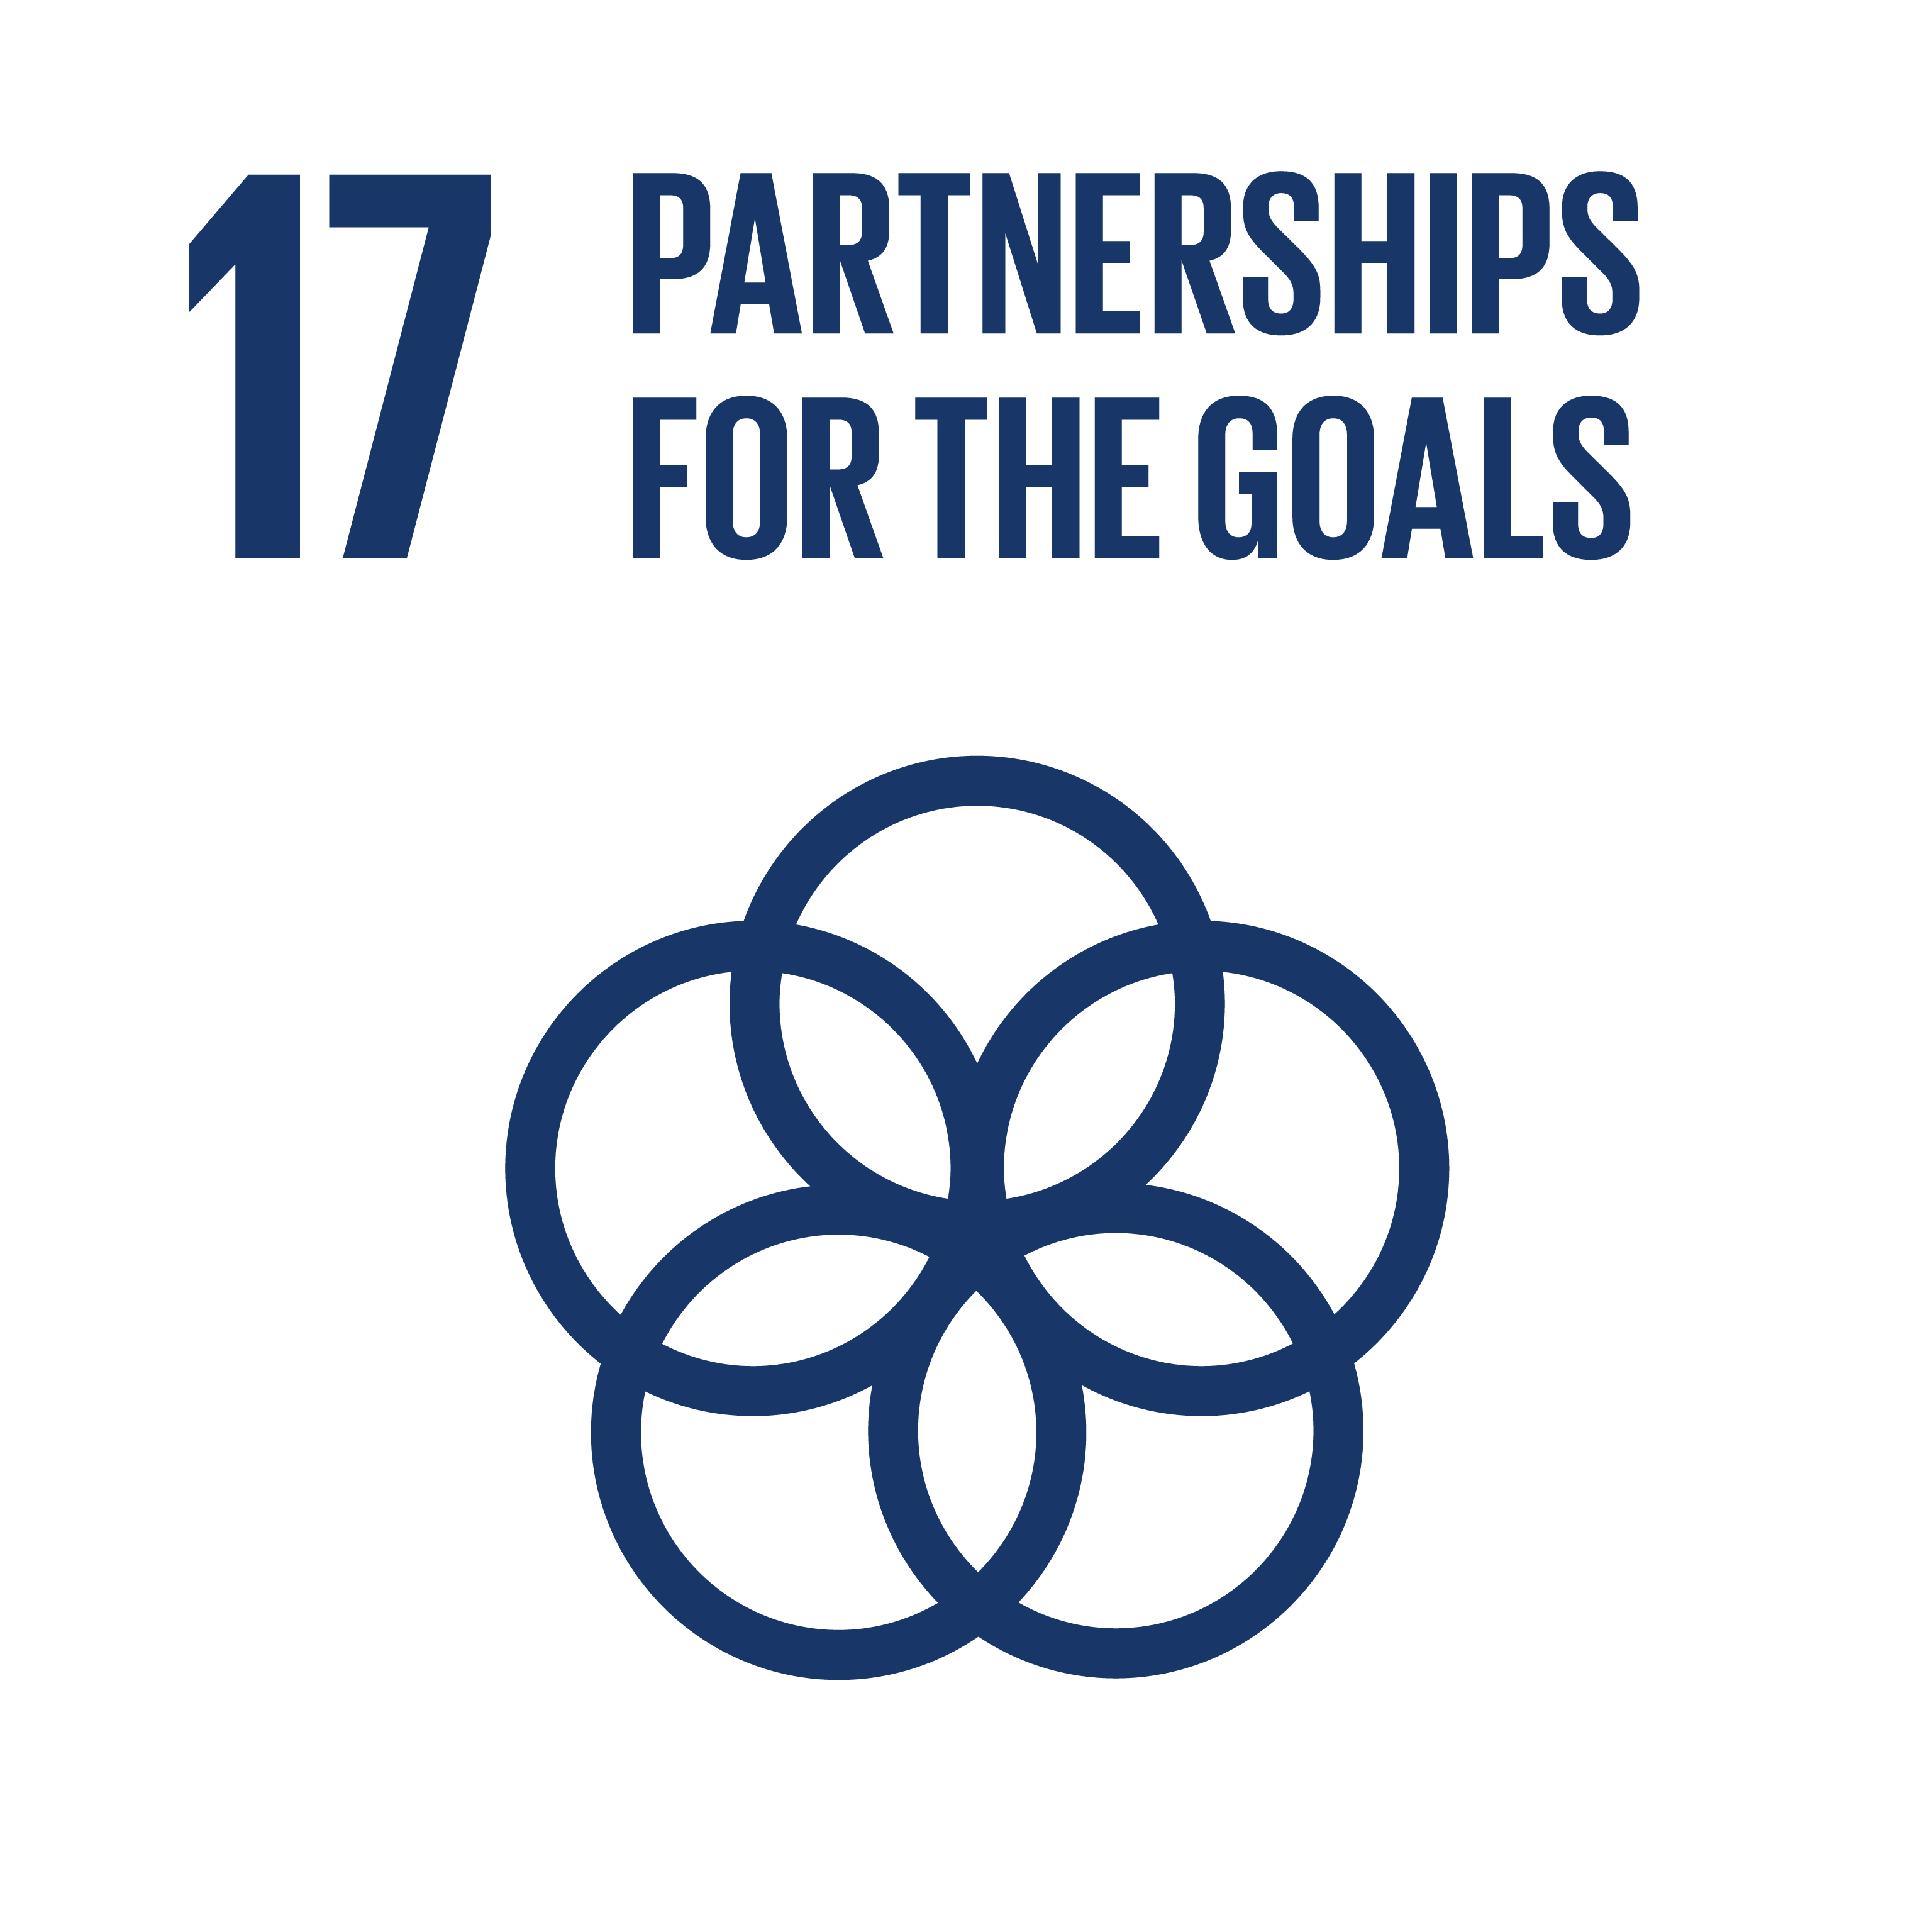 Sustainable Development Goals 17 partnershipes for the goals